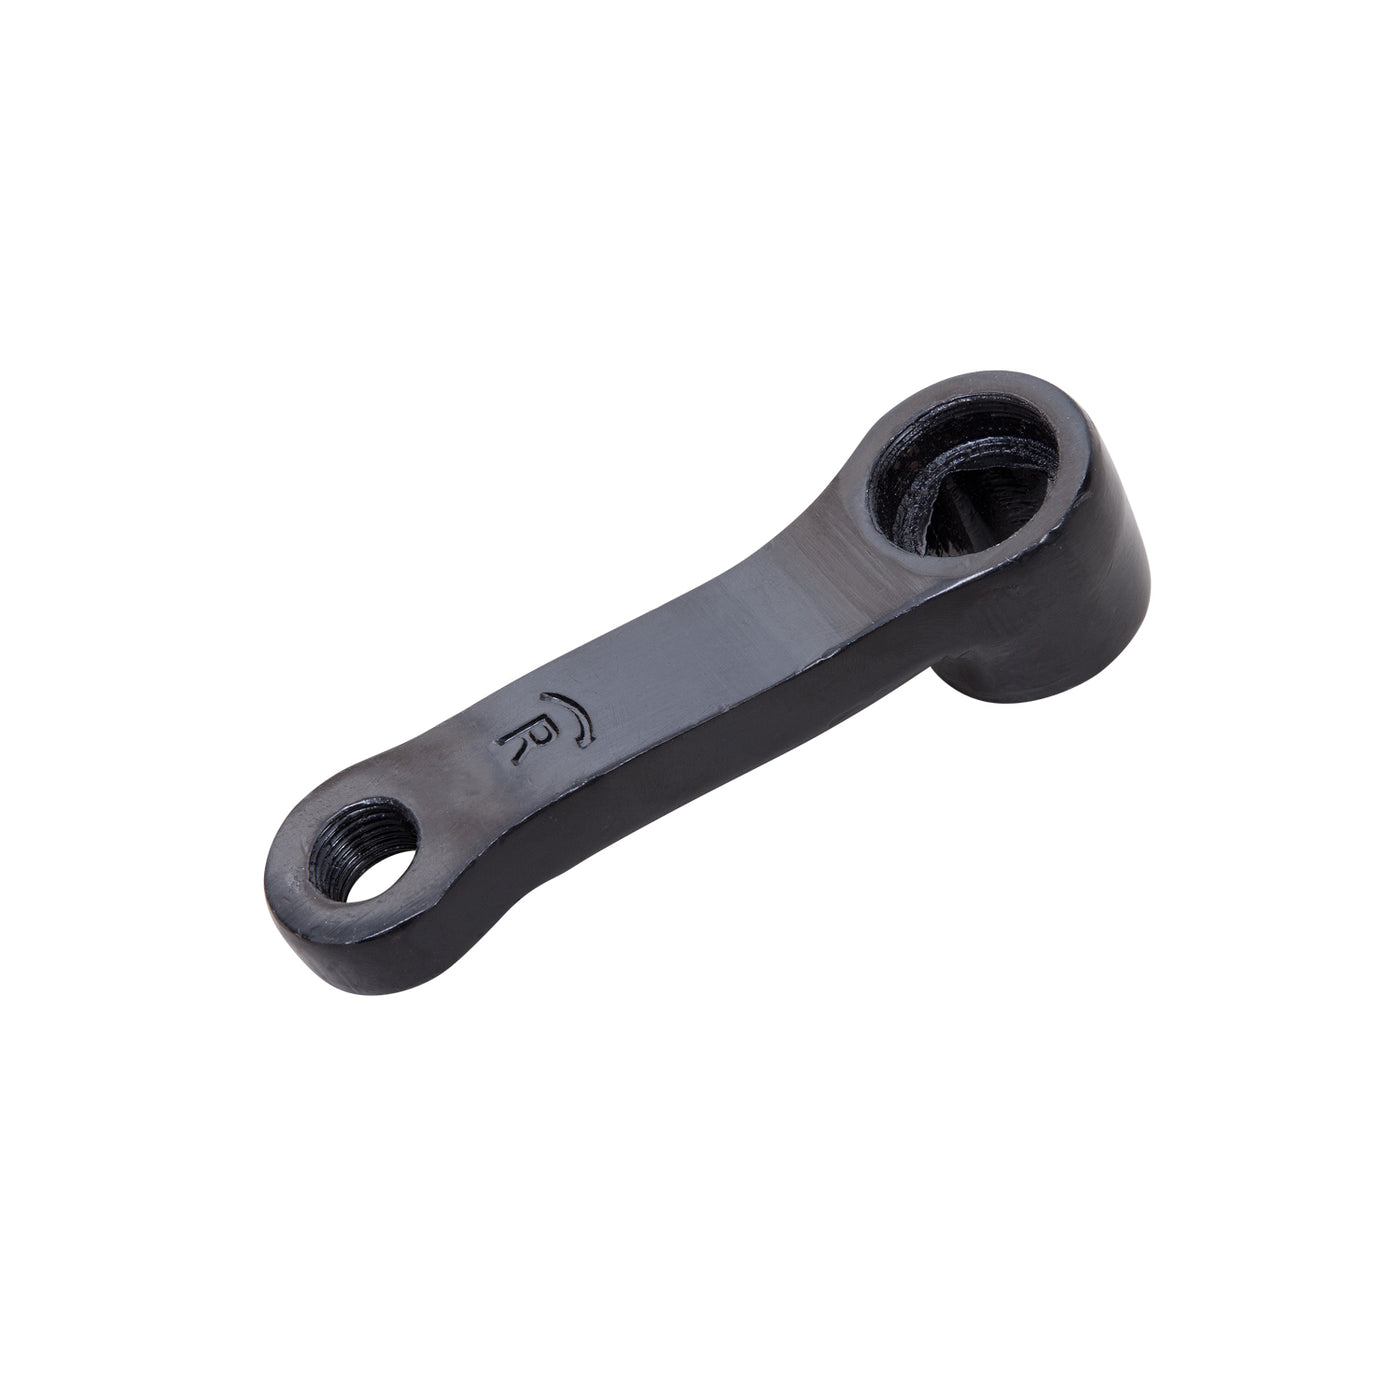 Right Crank arm for Under Desk Cycle